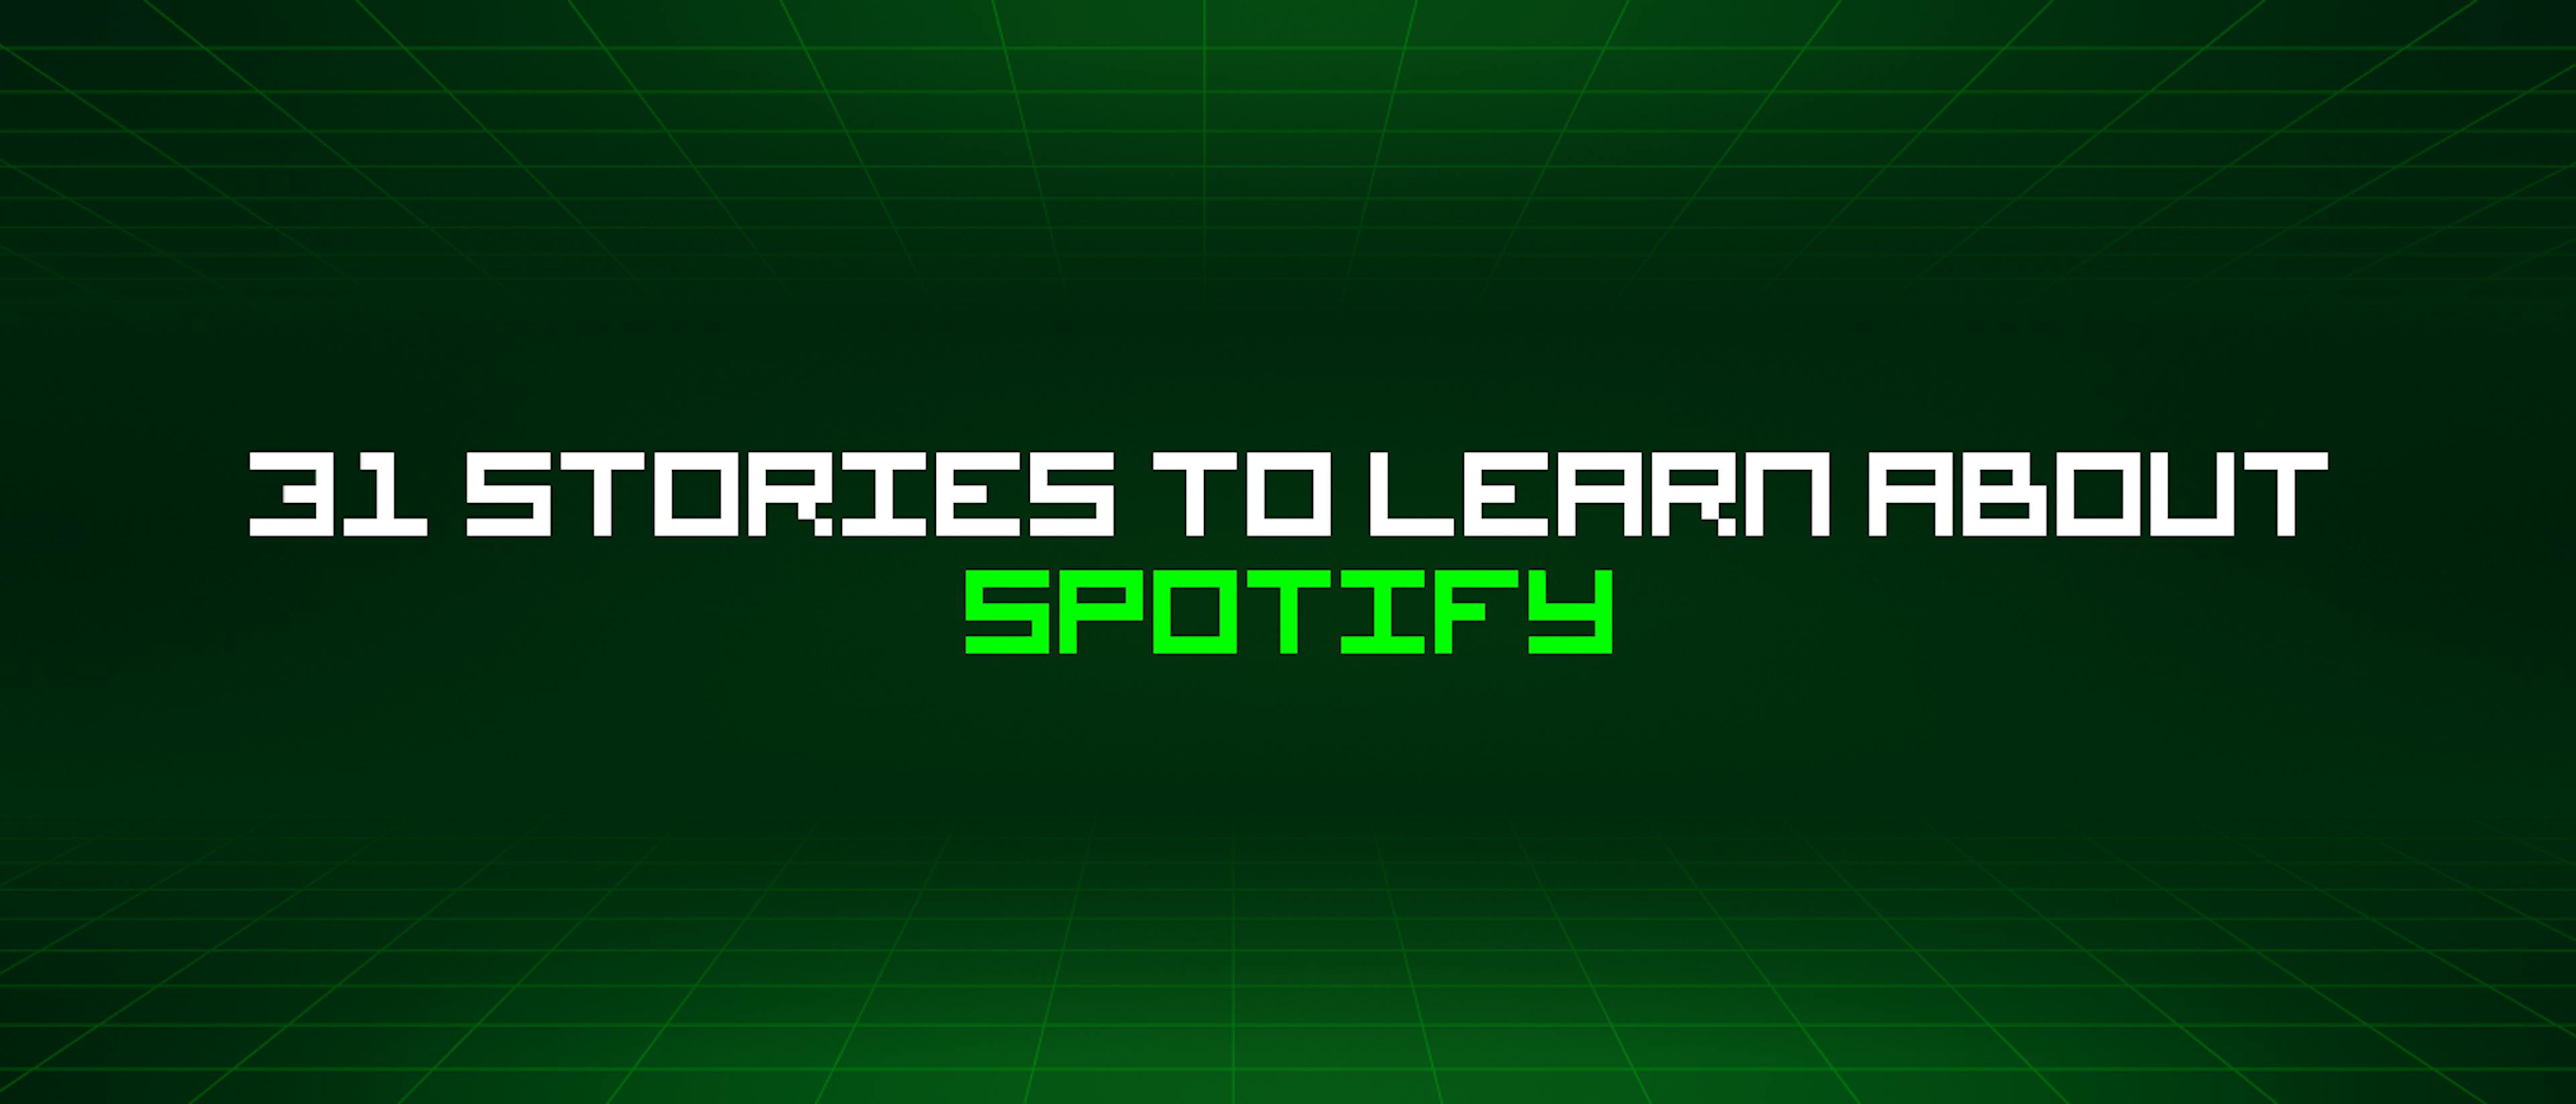 featured image - 31 Stories To Learn About Spotify